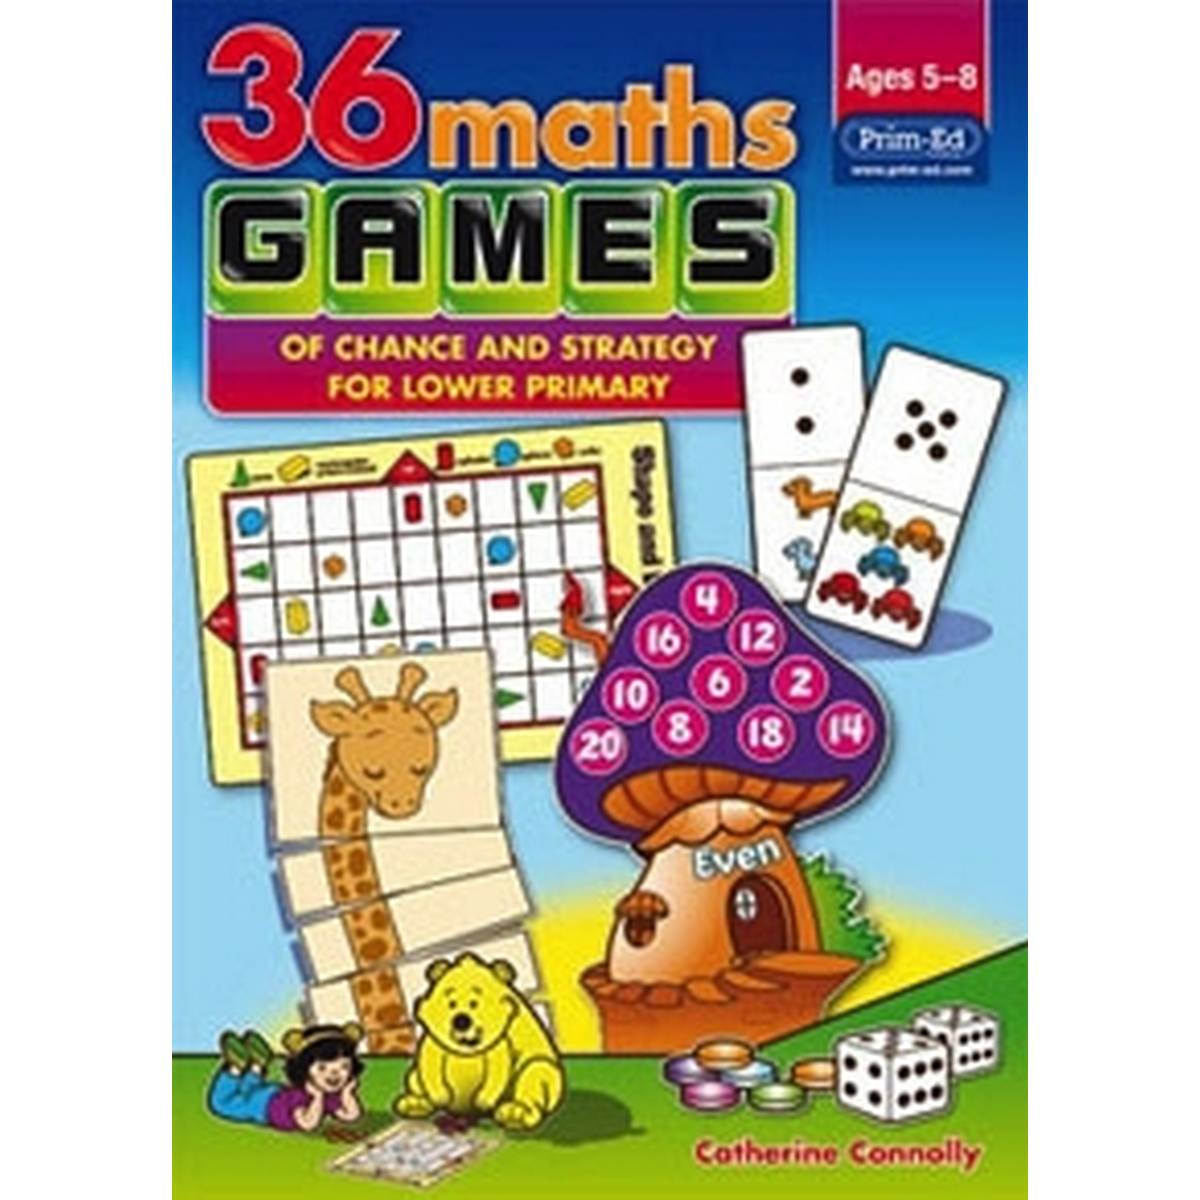 36 Maths Games of Chance and Strategy